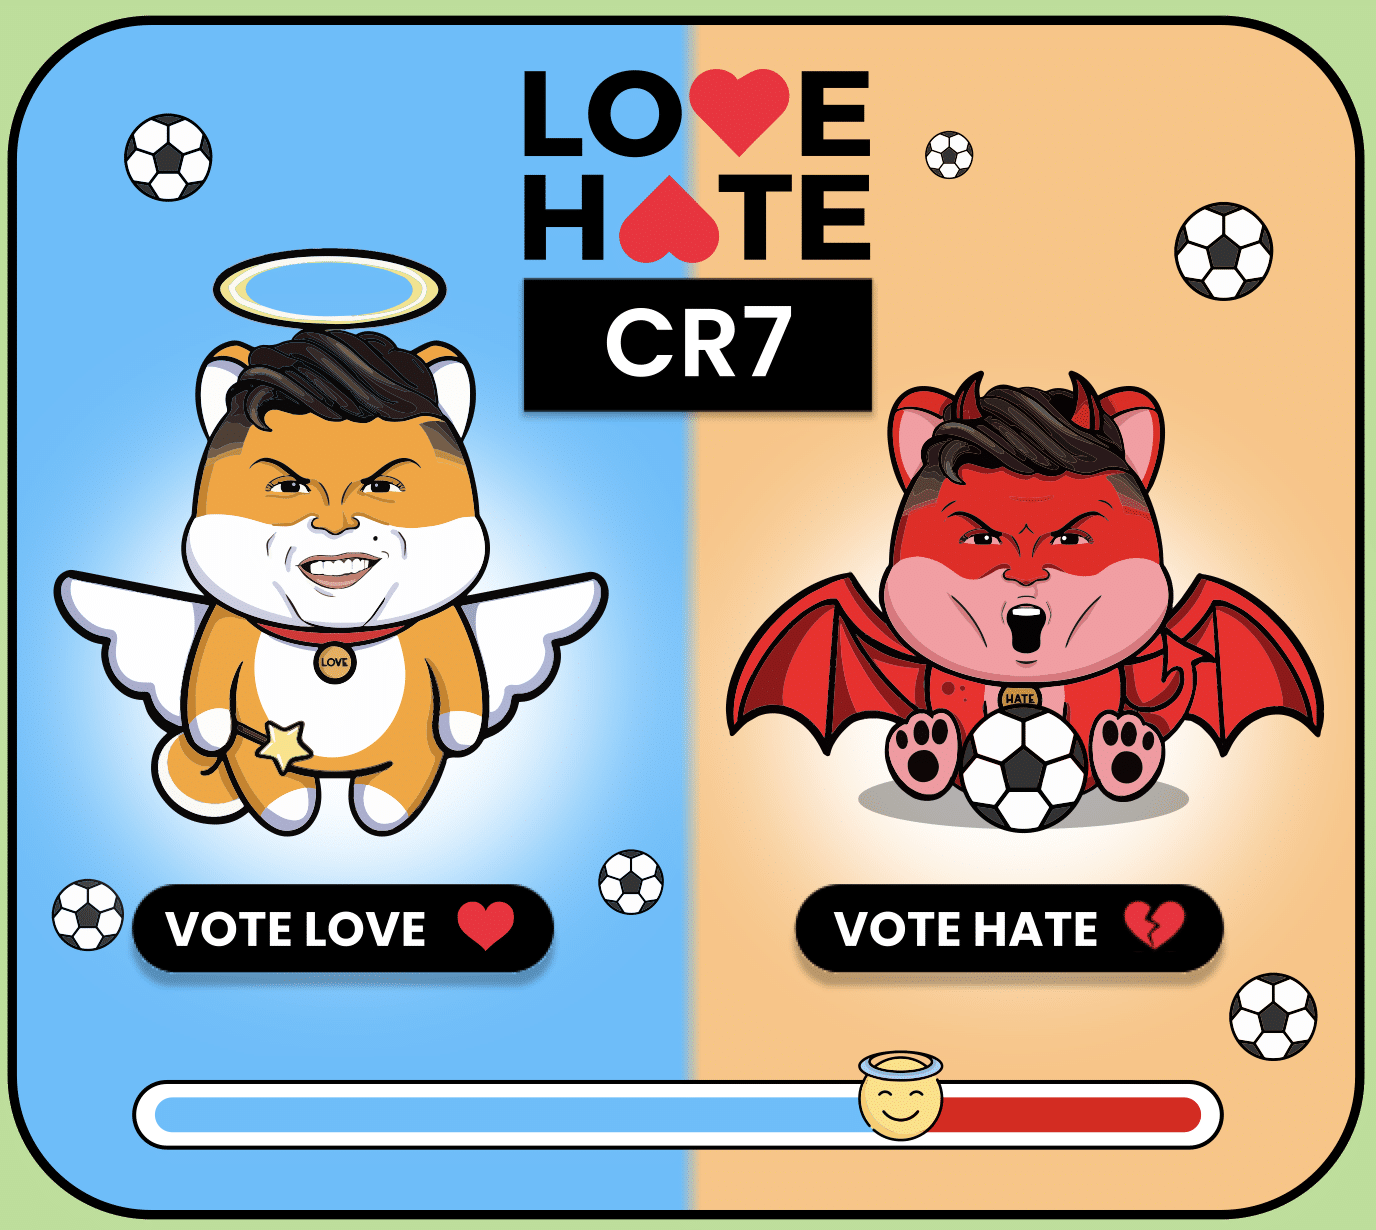 Love Hate Inu voting interface.